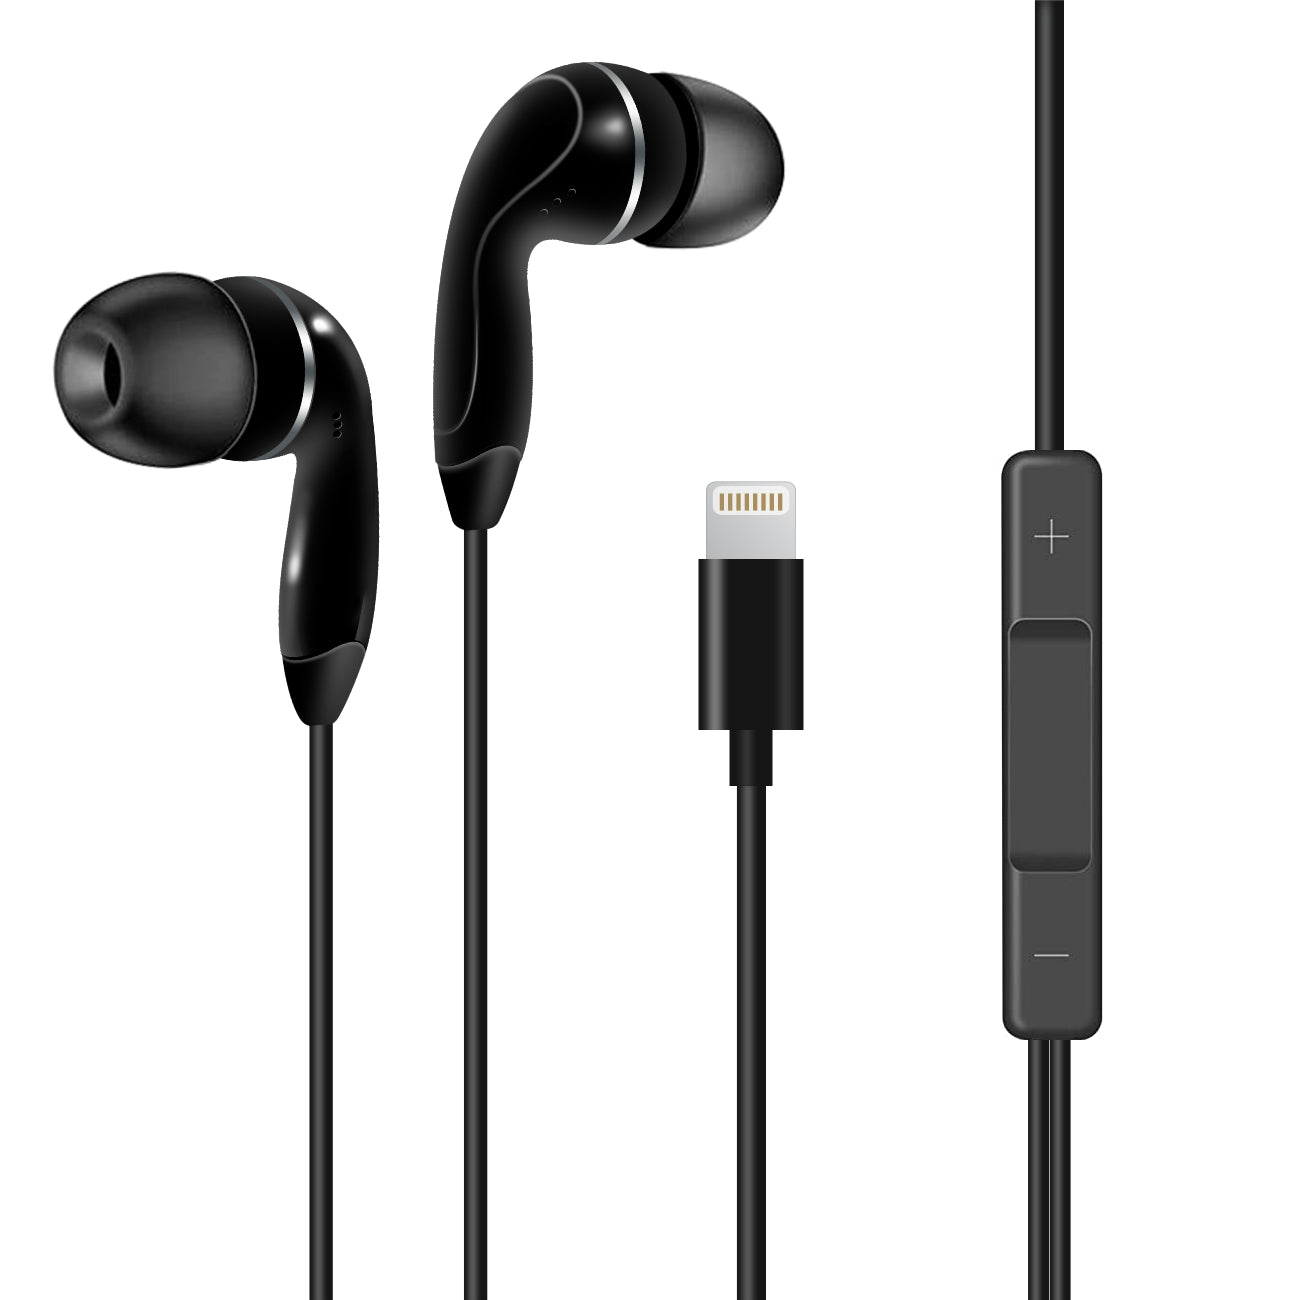 IN-EAR HEADPHONES WITH MIC FOR IOS IN BLACK